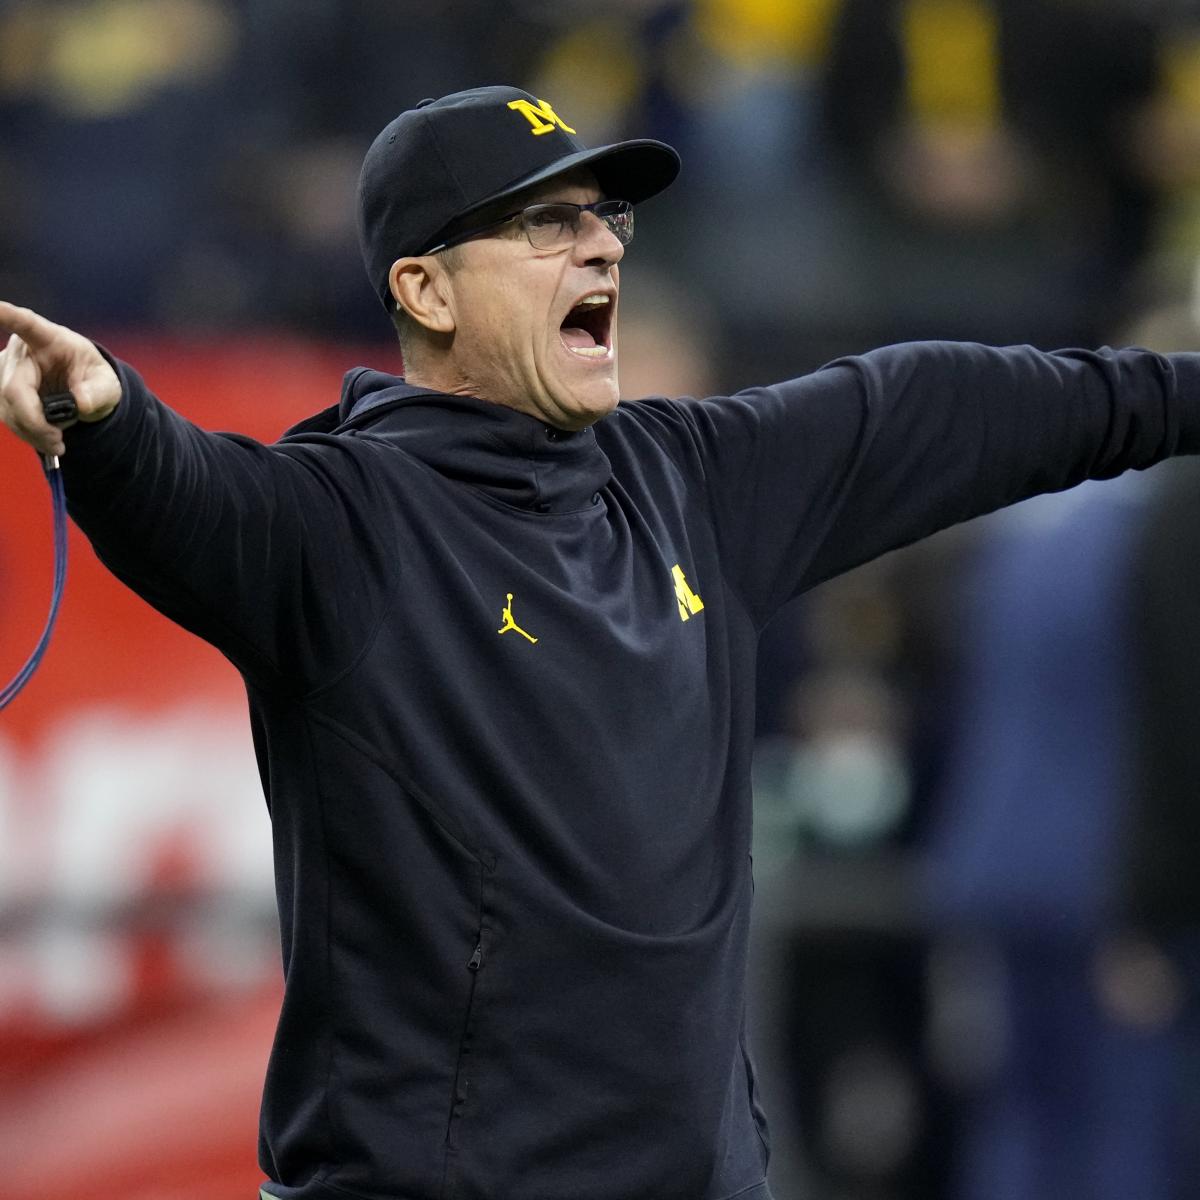 Jim Harbaugh Is the Coach Who Can Fix the Las Vegas Raiders